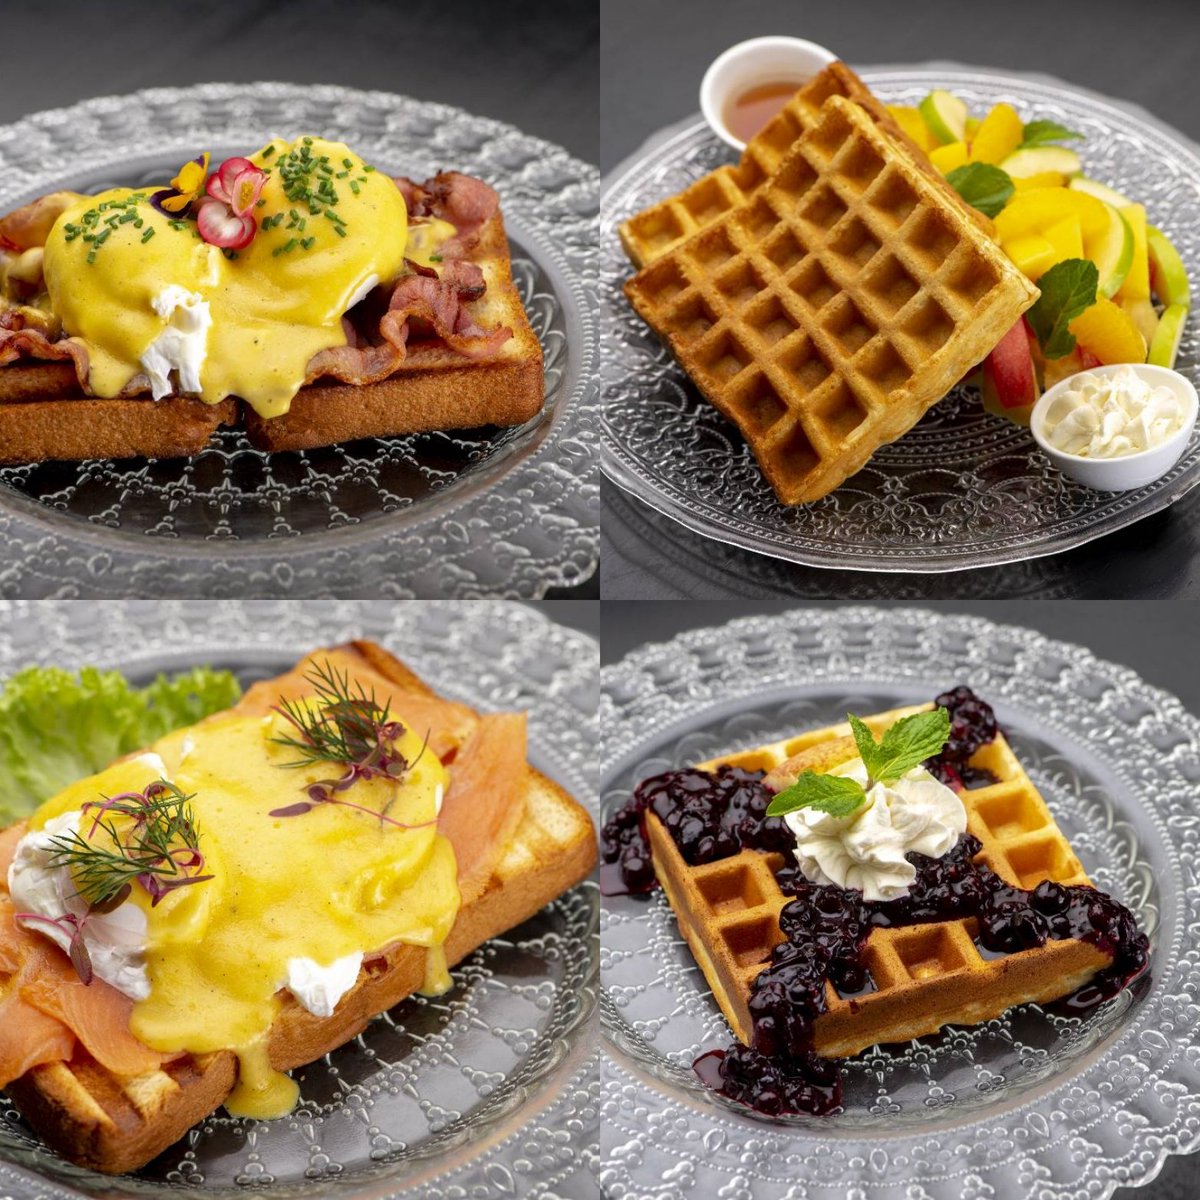 Dream big, eat well. Today's goals start with a tasty #breakfast from Cafesserie!😊☕🍳🥞🥓

#BeOurGuest #DineWithUs #OrderCafesserie #Breakfast